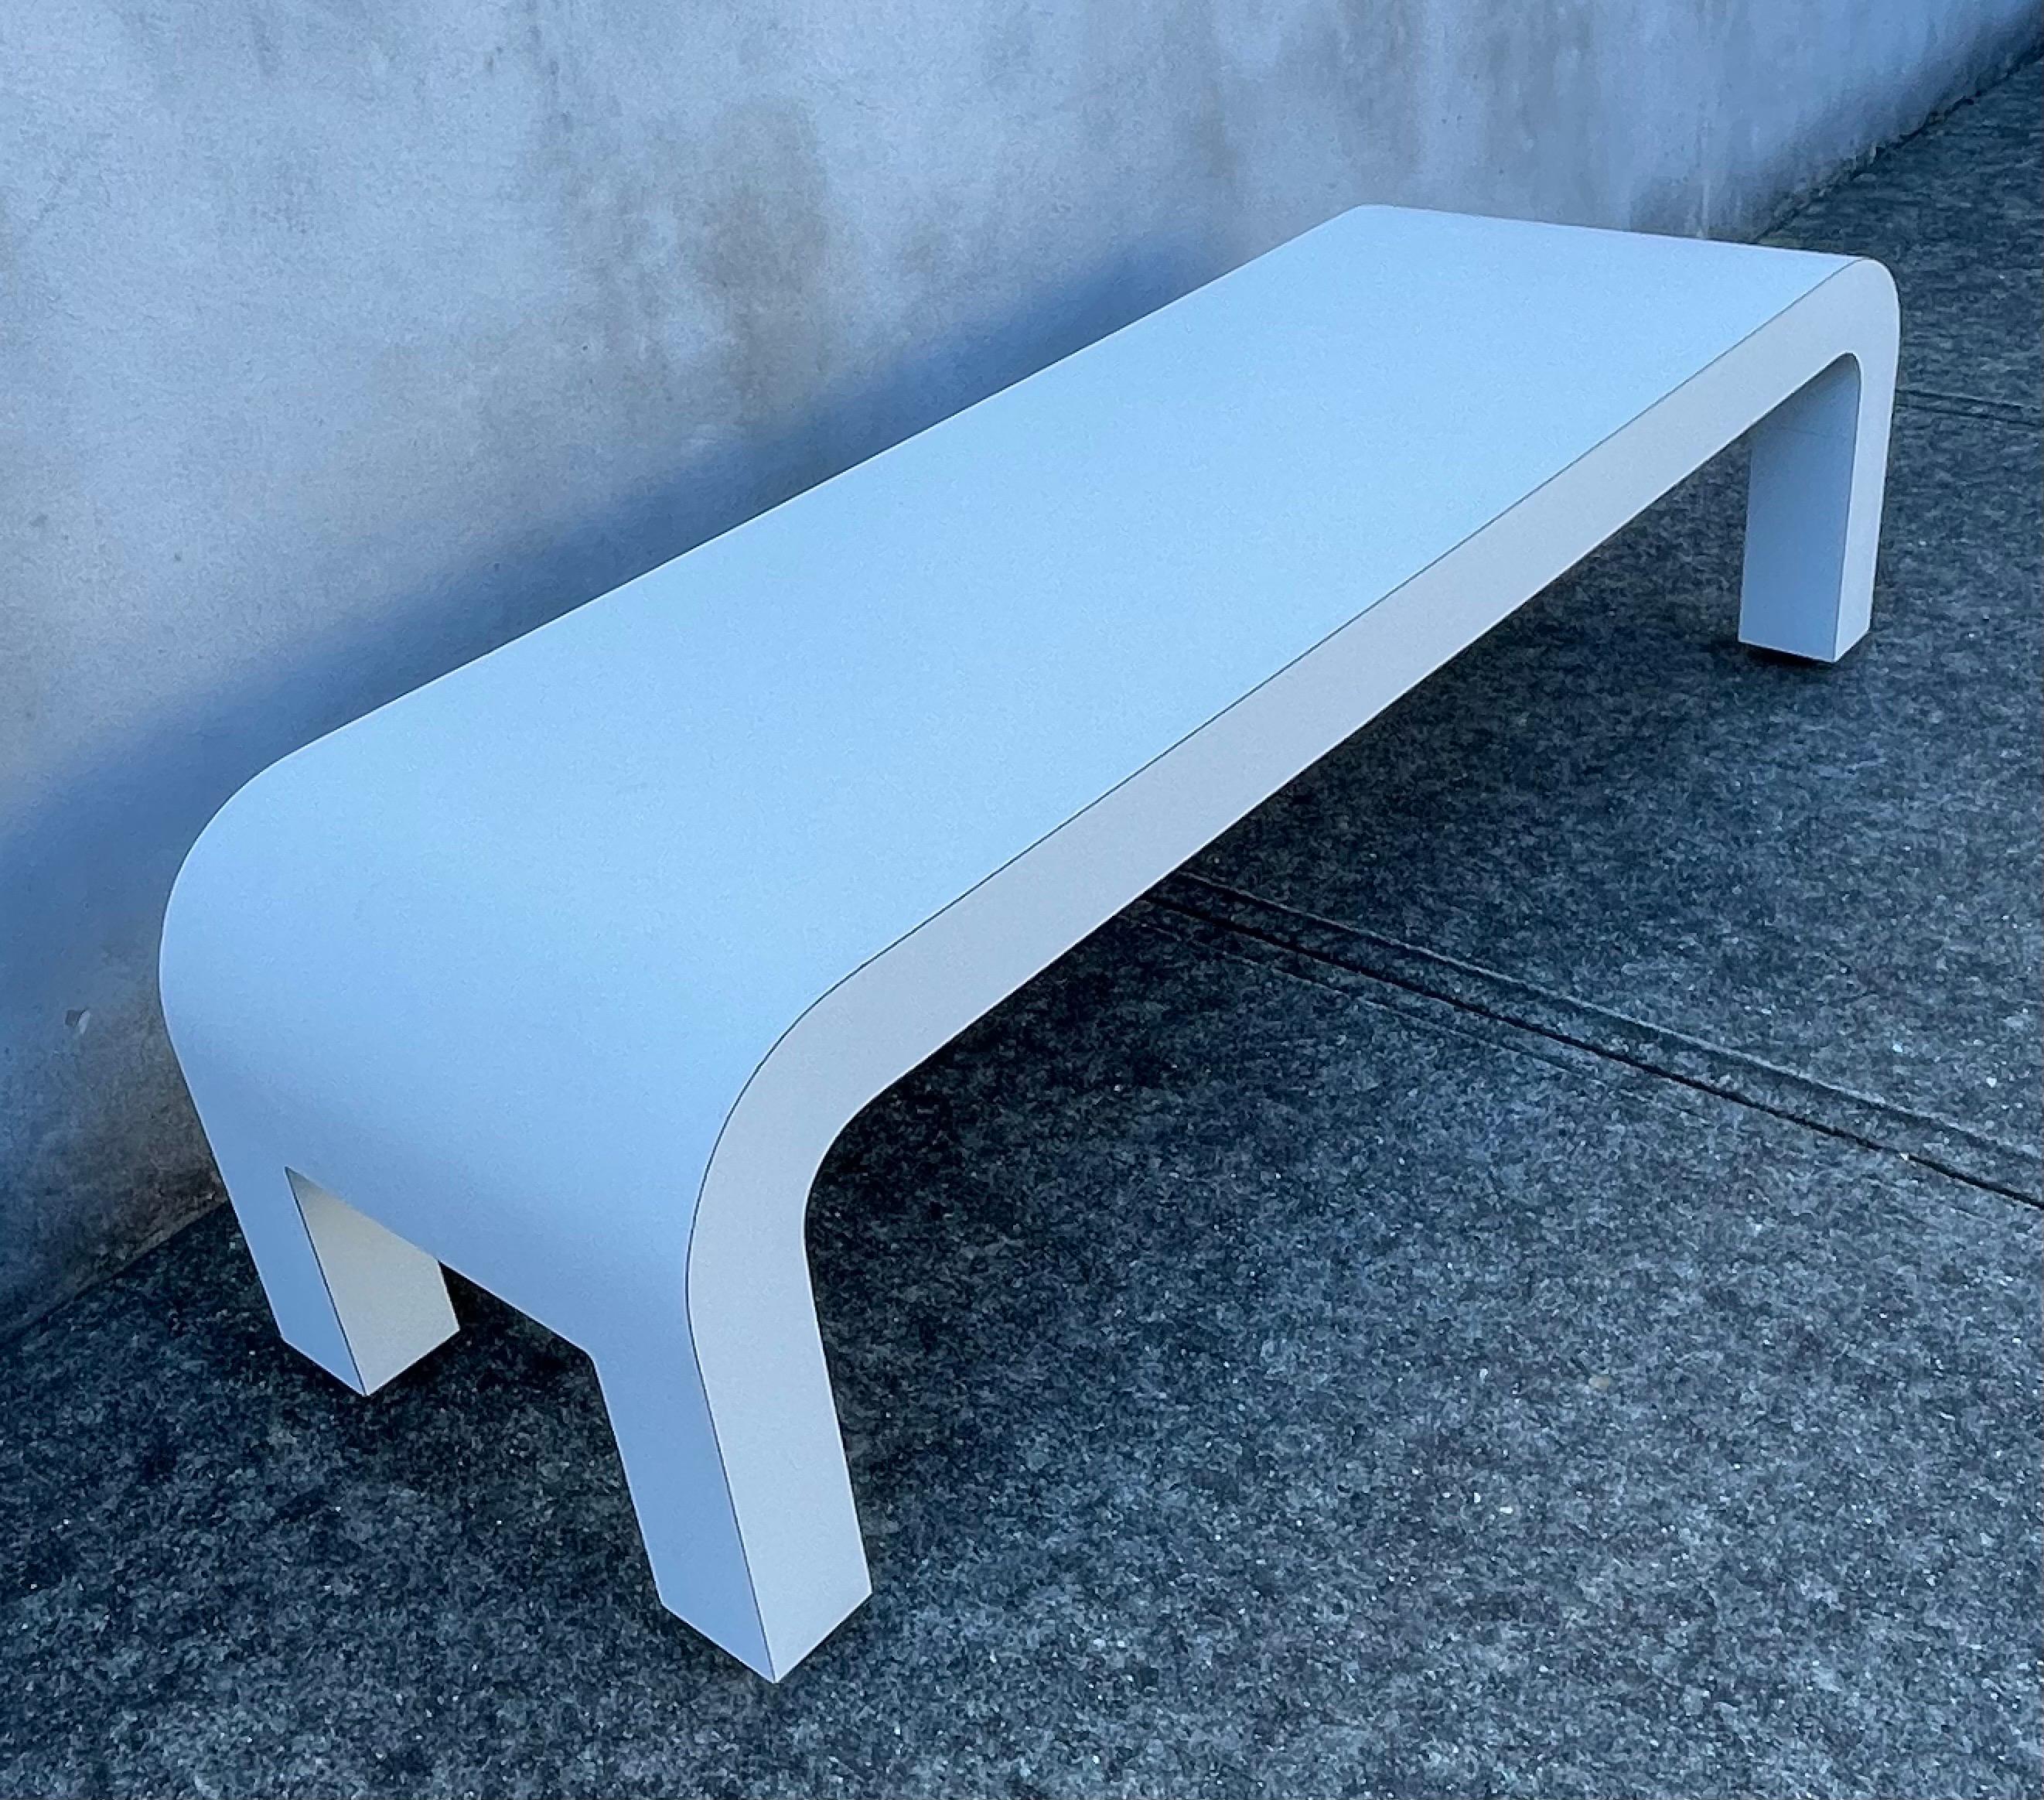 Very cool mid century white rectangular coffee table very much in the style and design by Karl Springer. This piece is most likely a custom piece and one of a kind, white formica, acquired from a New York city upscale apartment. Original authentic